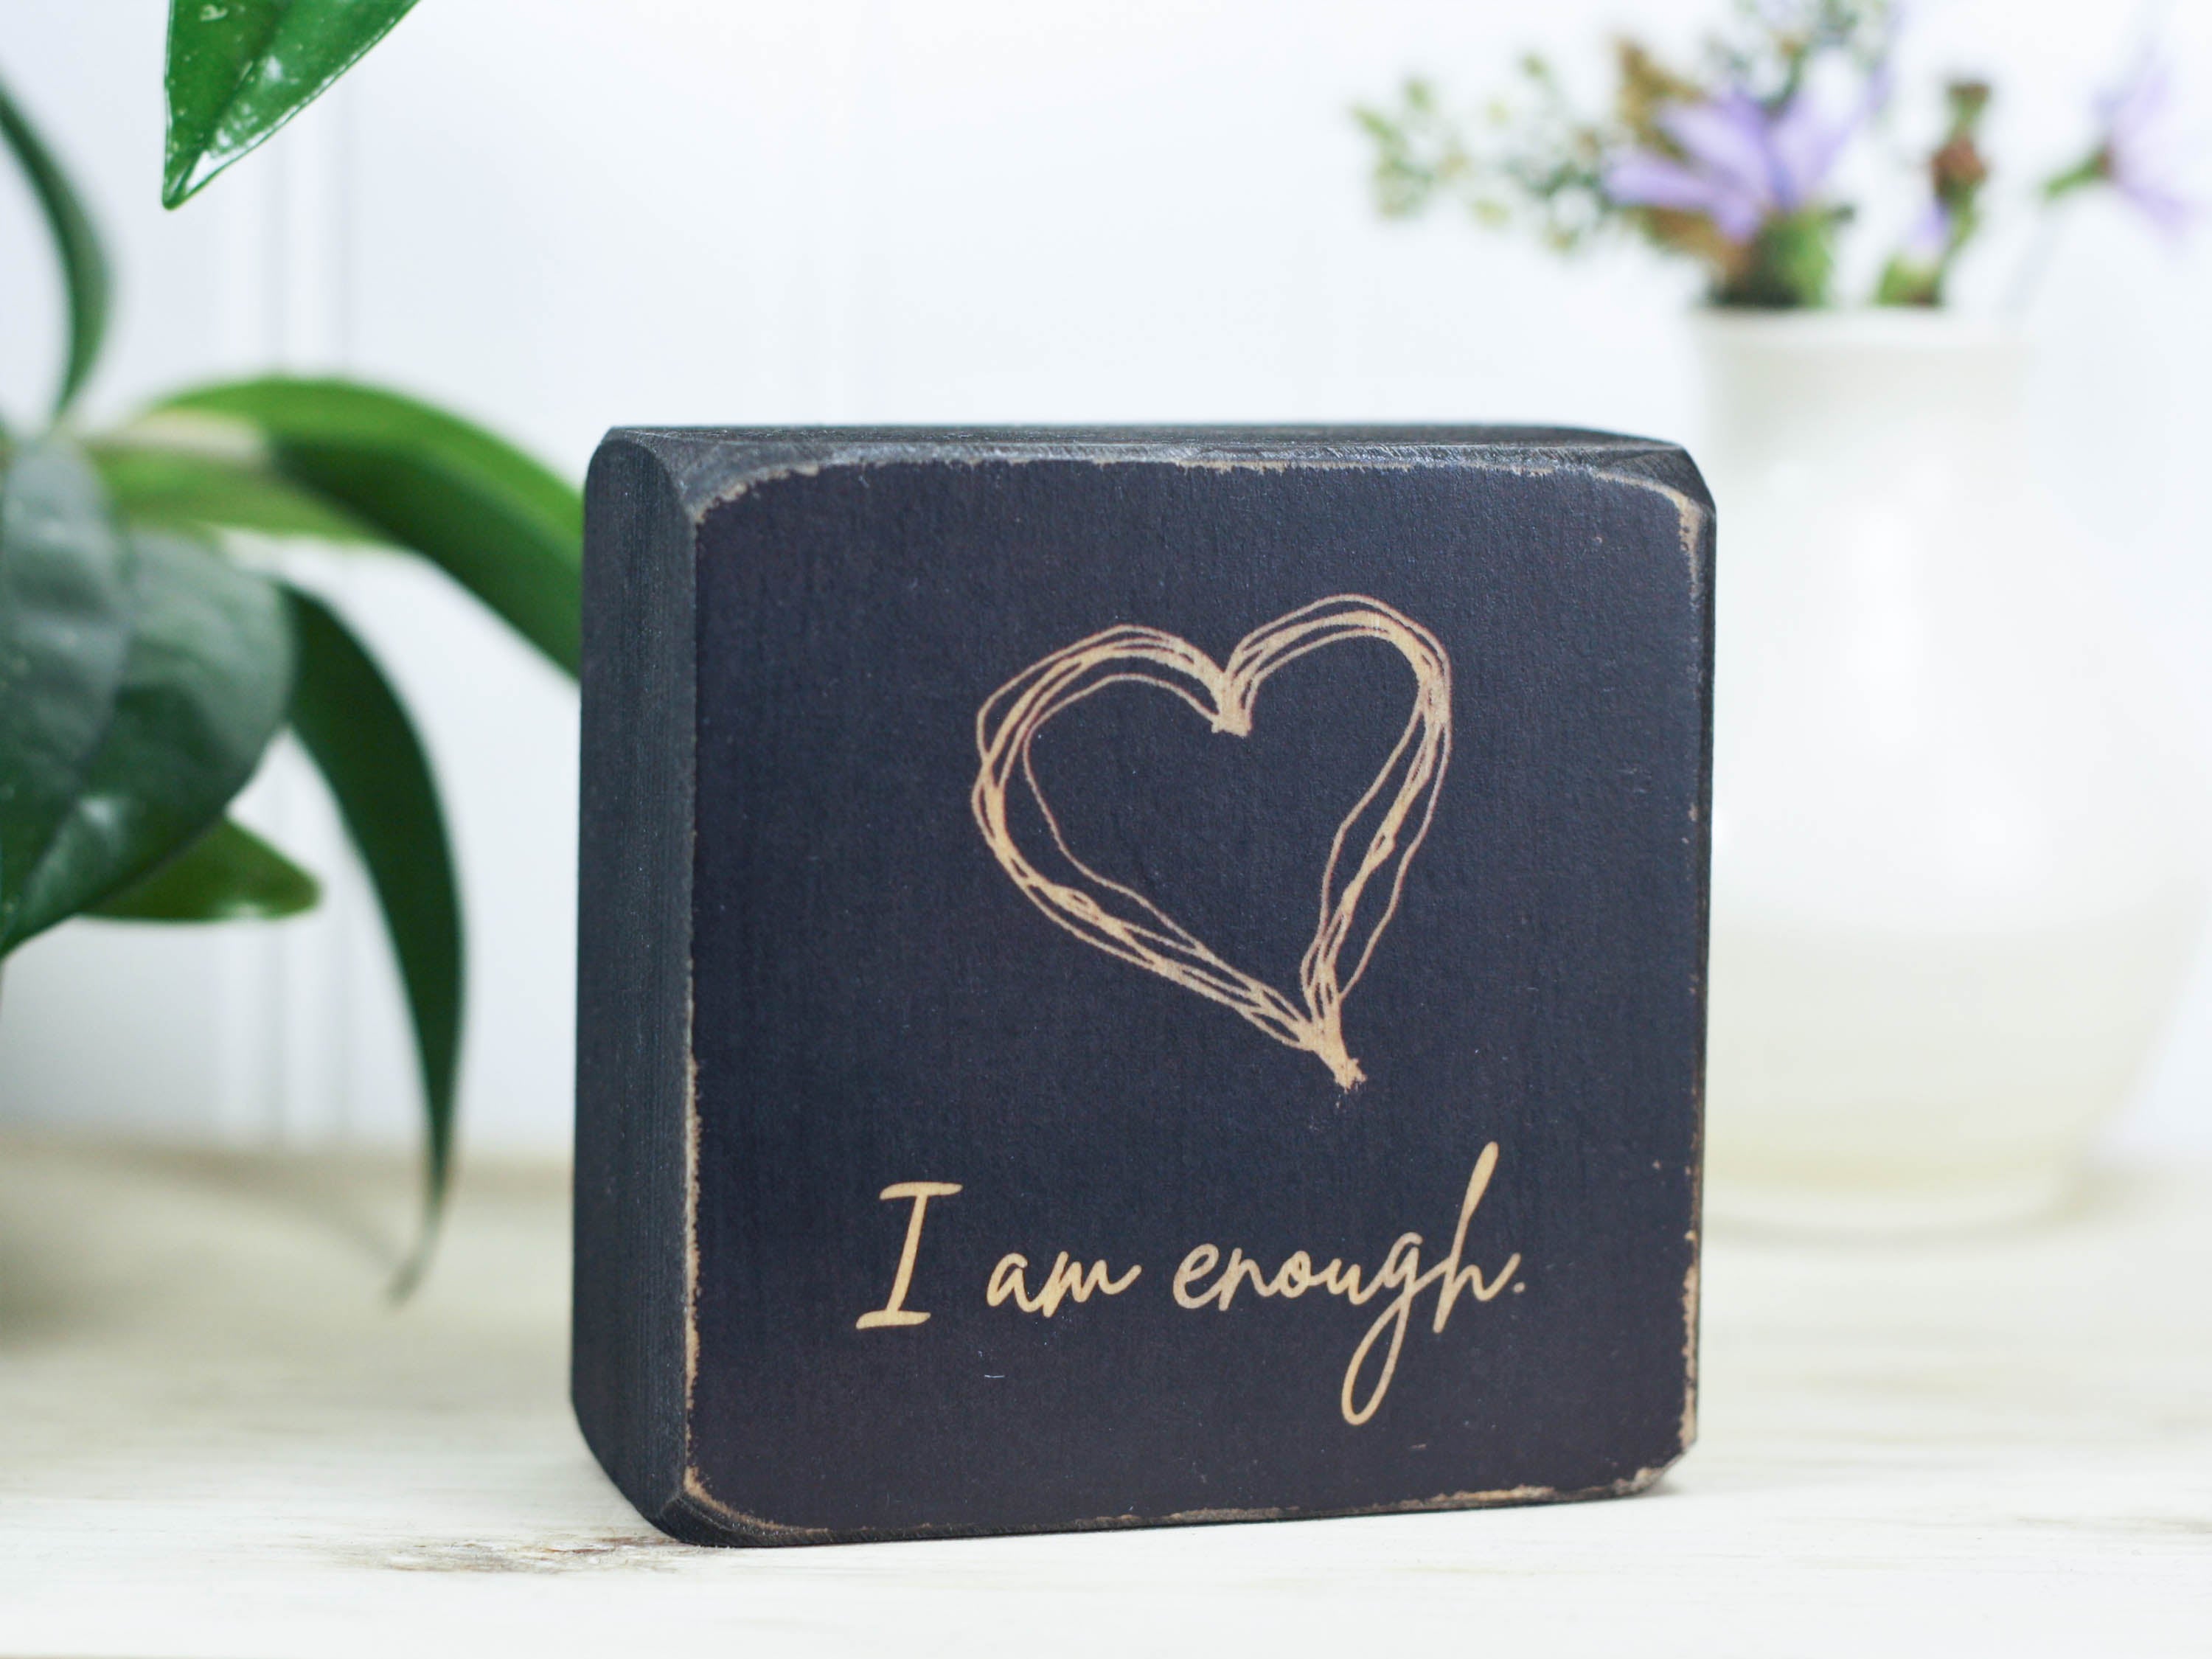 Small, freestanding, distressed black, solid wood sign with saying "I am enough".